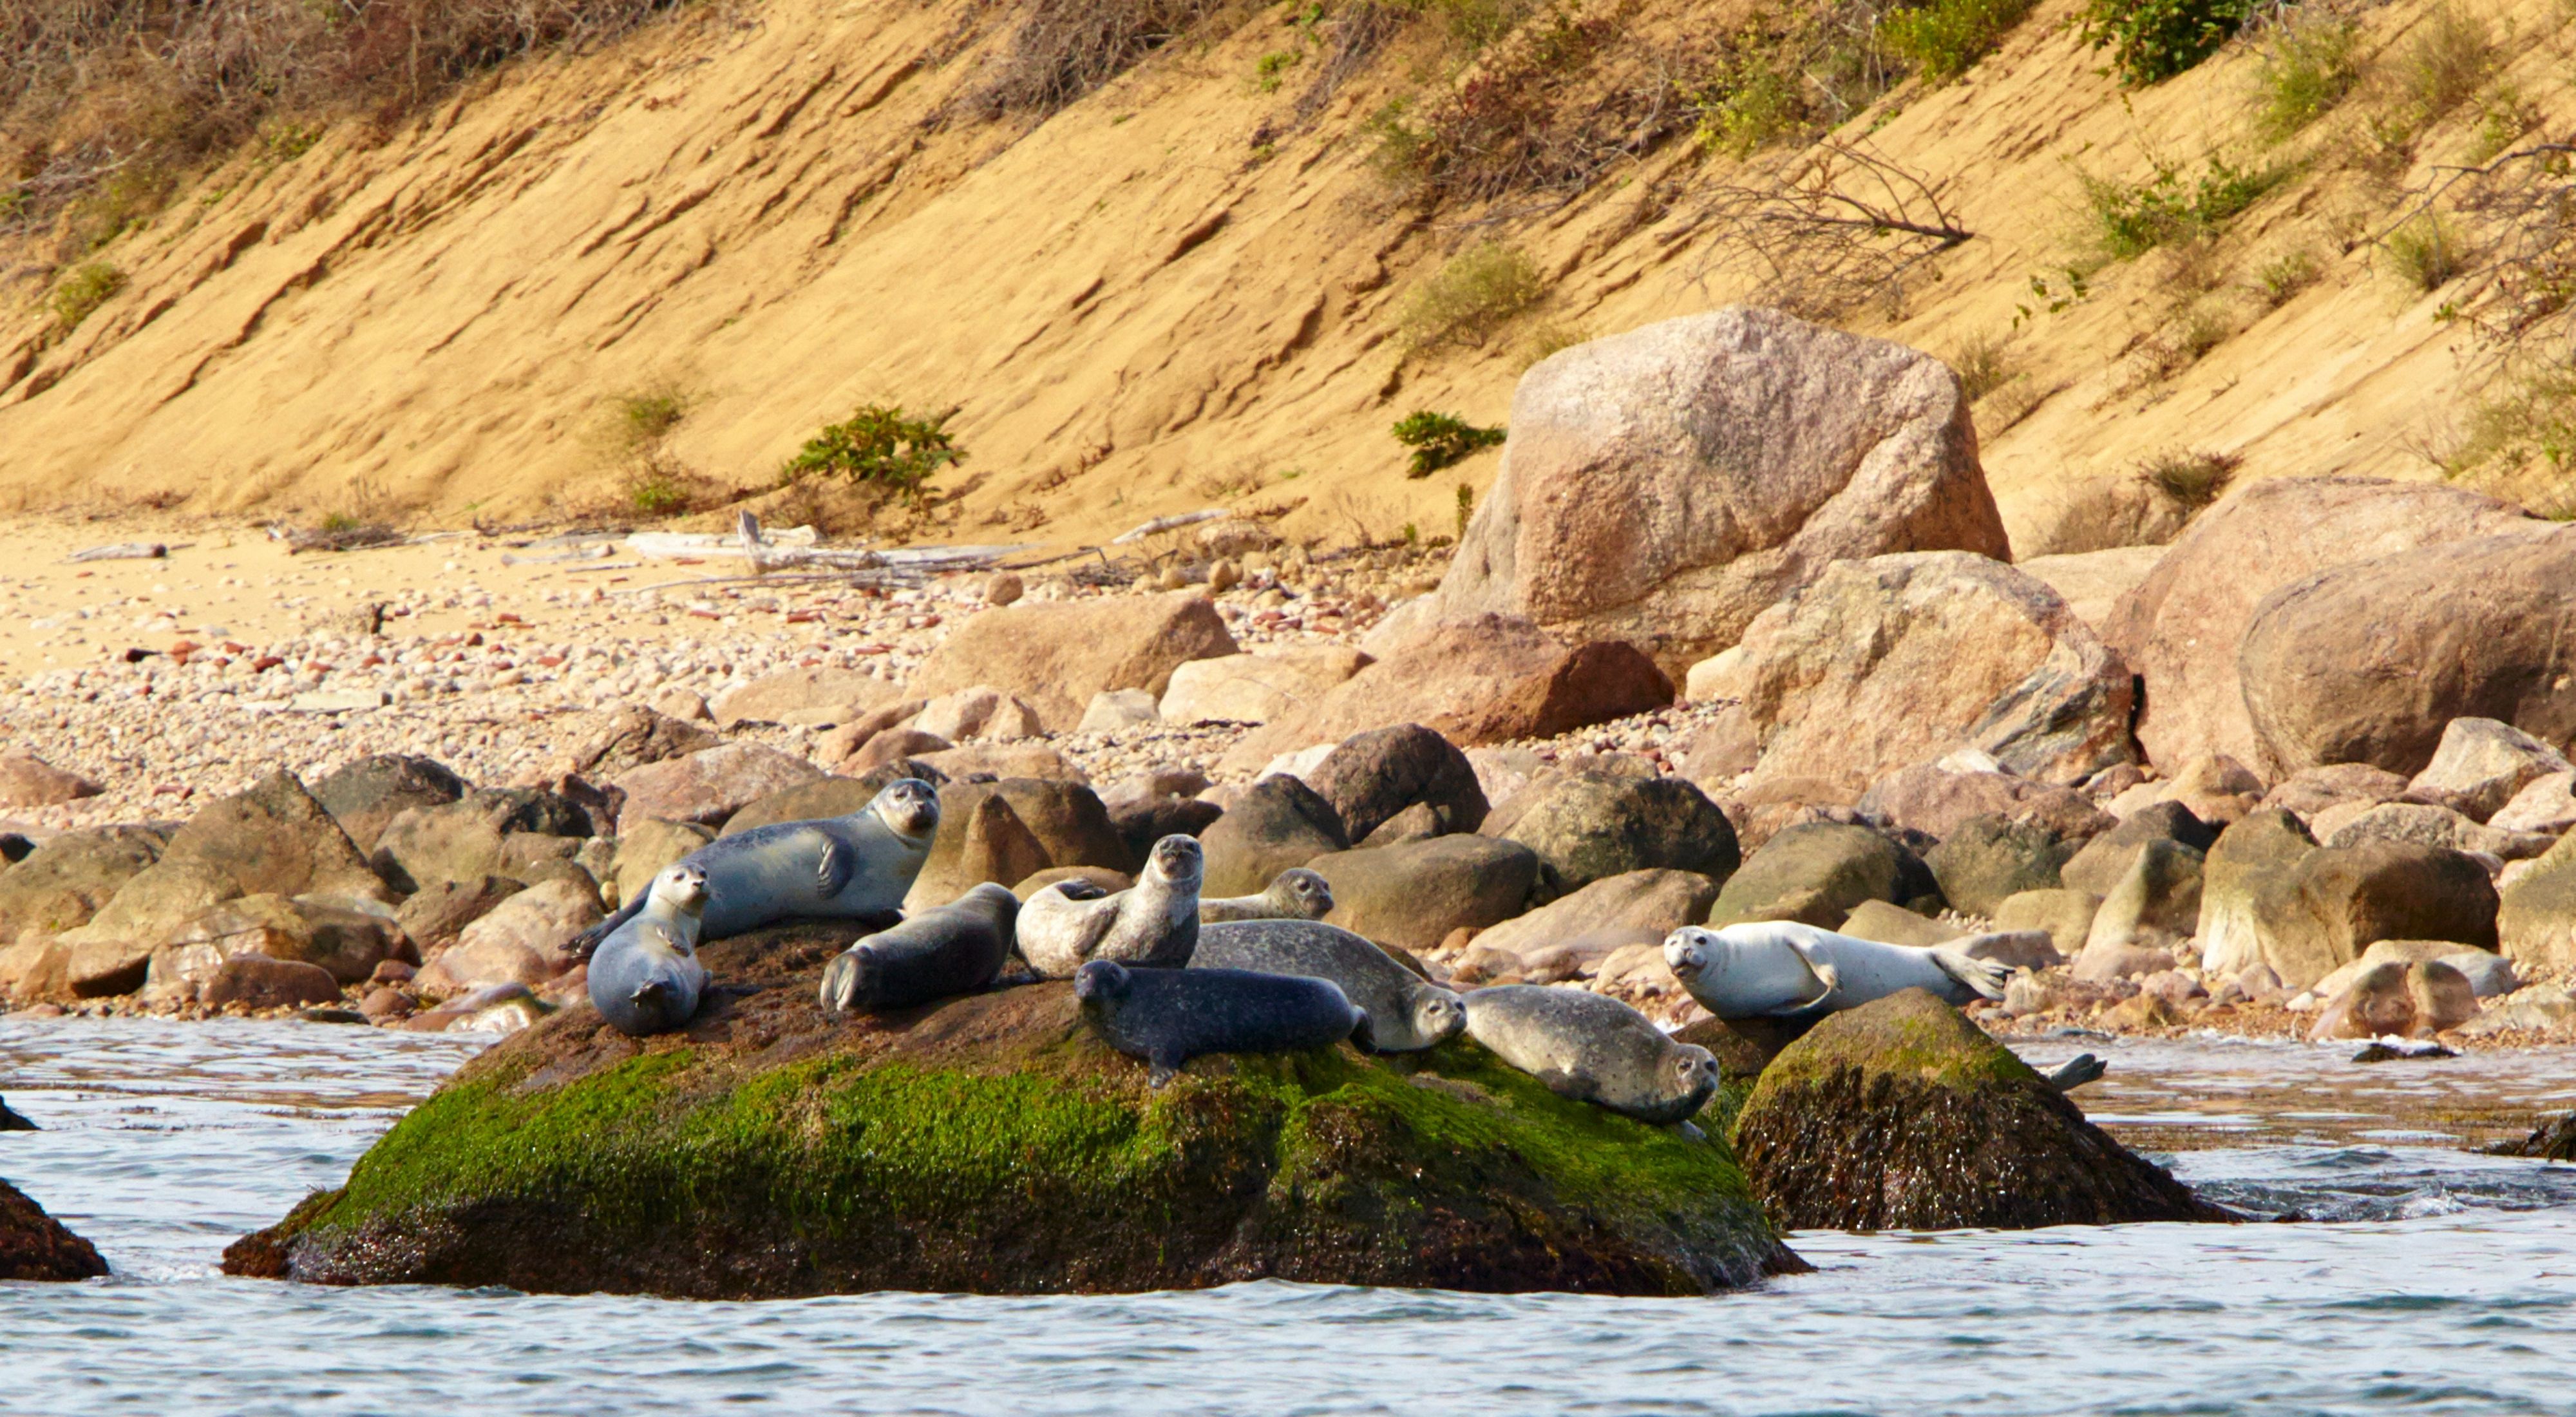 A group of seals perched on boulders on an ocean shore.